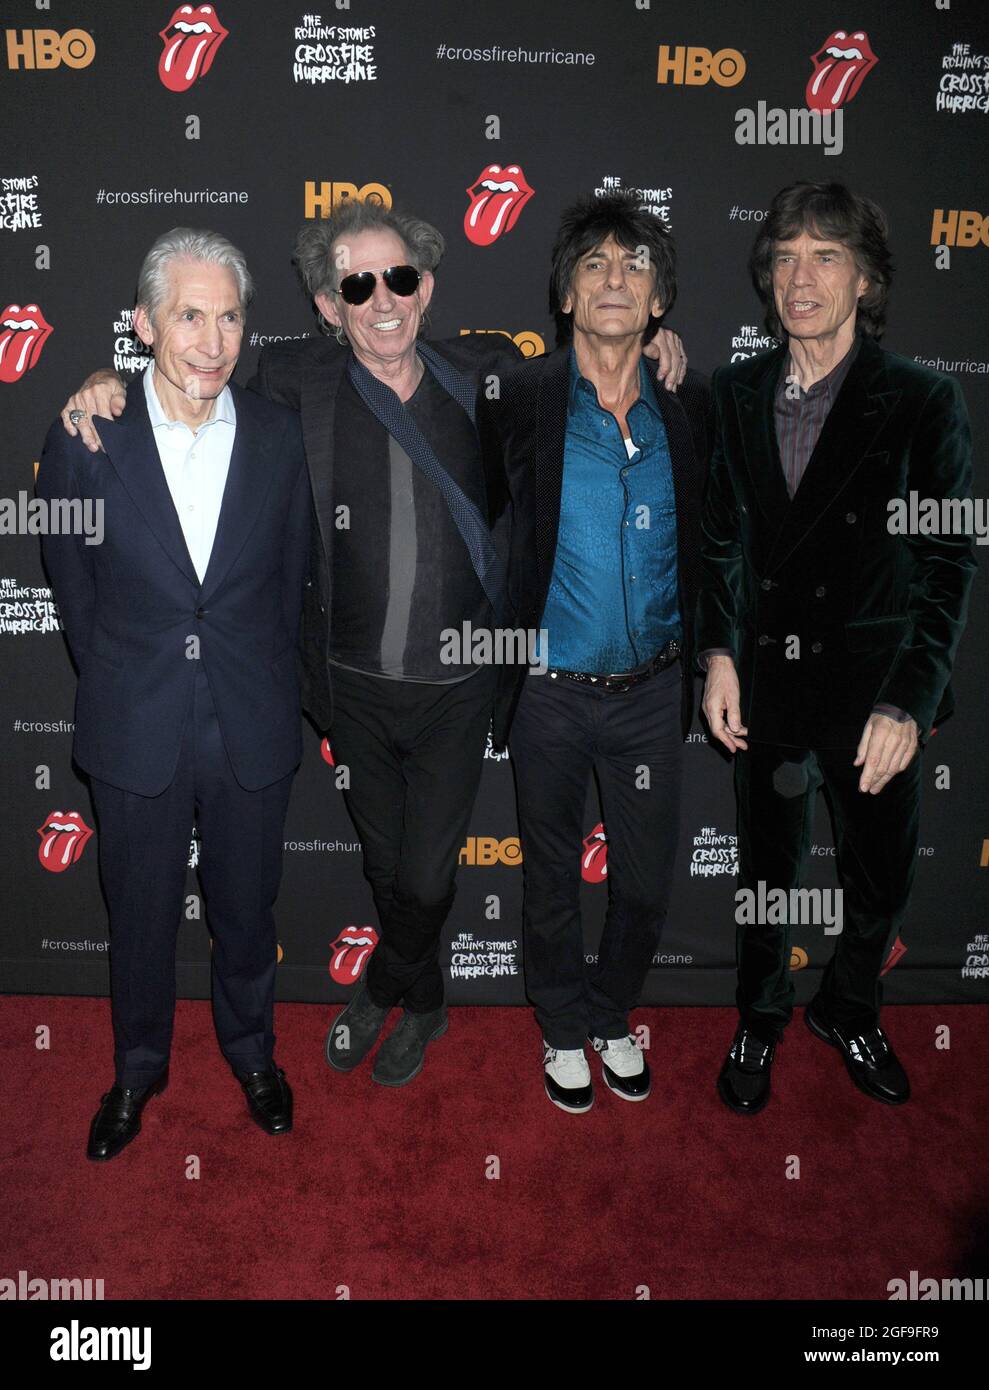 **FILE PHOTO** Charlie Watts Has Passed Away . NEW YORK, NY - NOVEMBER 13: Charlie Watts, Keith Richards, Ronnie Wood and Mick Jagger of The Rolling Stones at 'The Rolling Stones Crossfire Hurricane' Premiere at Ziegfeld Theater on November 13, 2012 in New York City. Credit: Dennis Van Tine/MediaPunch Stock Photo